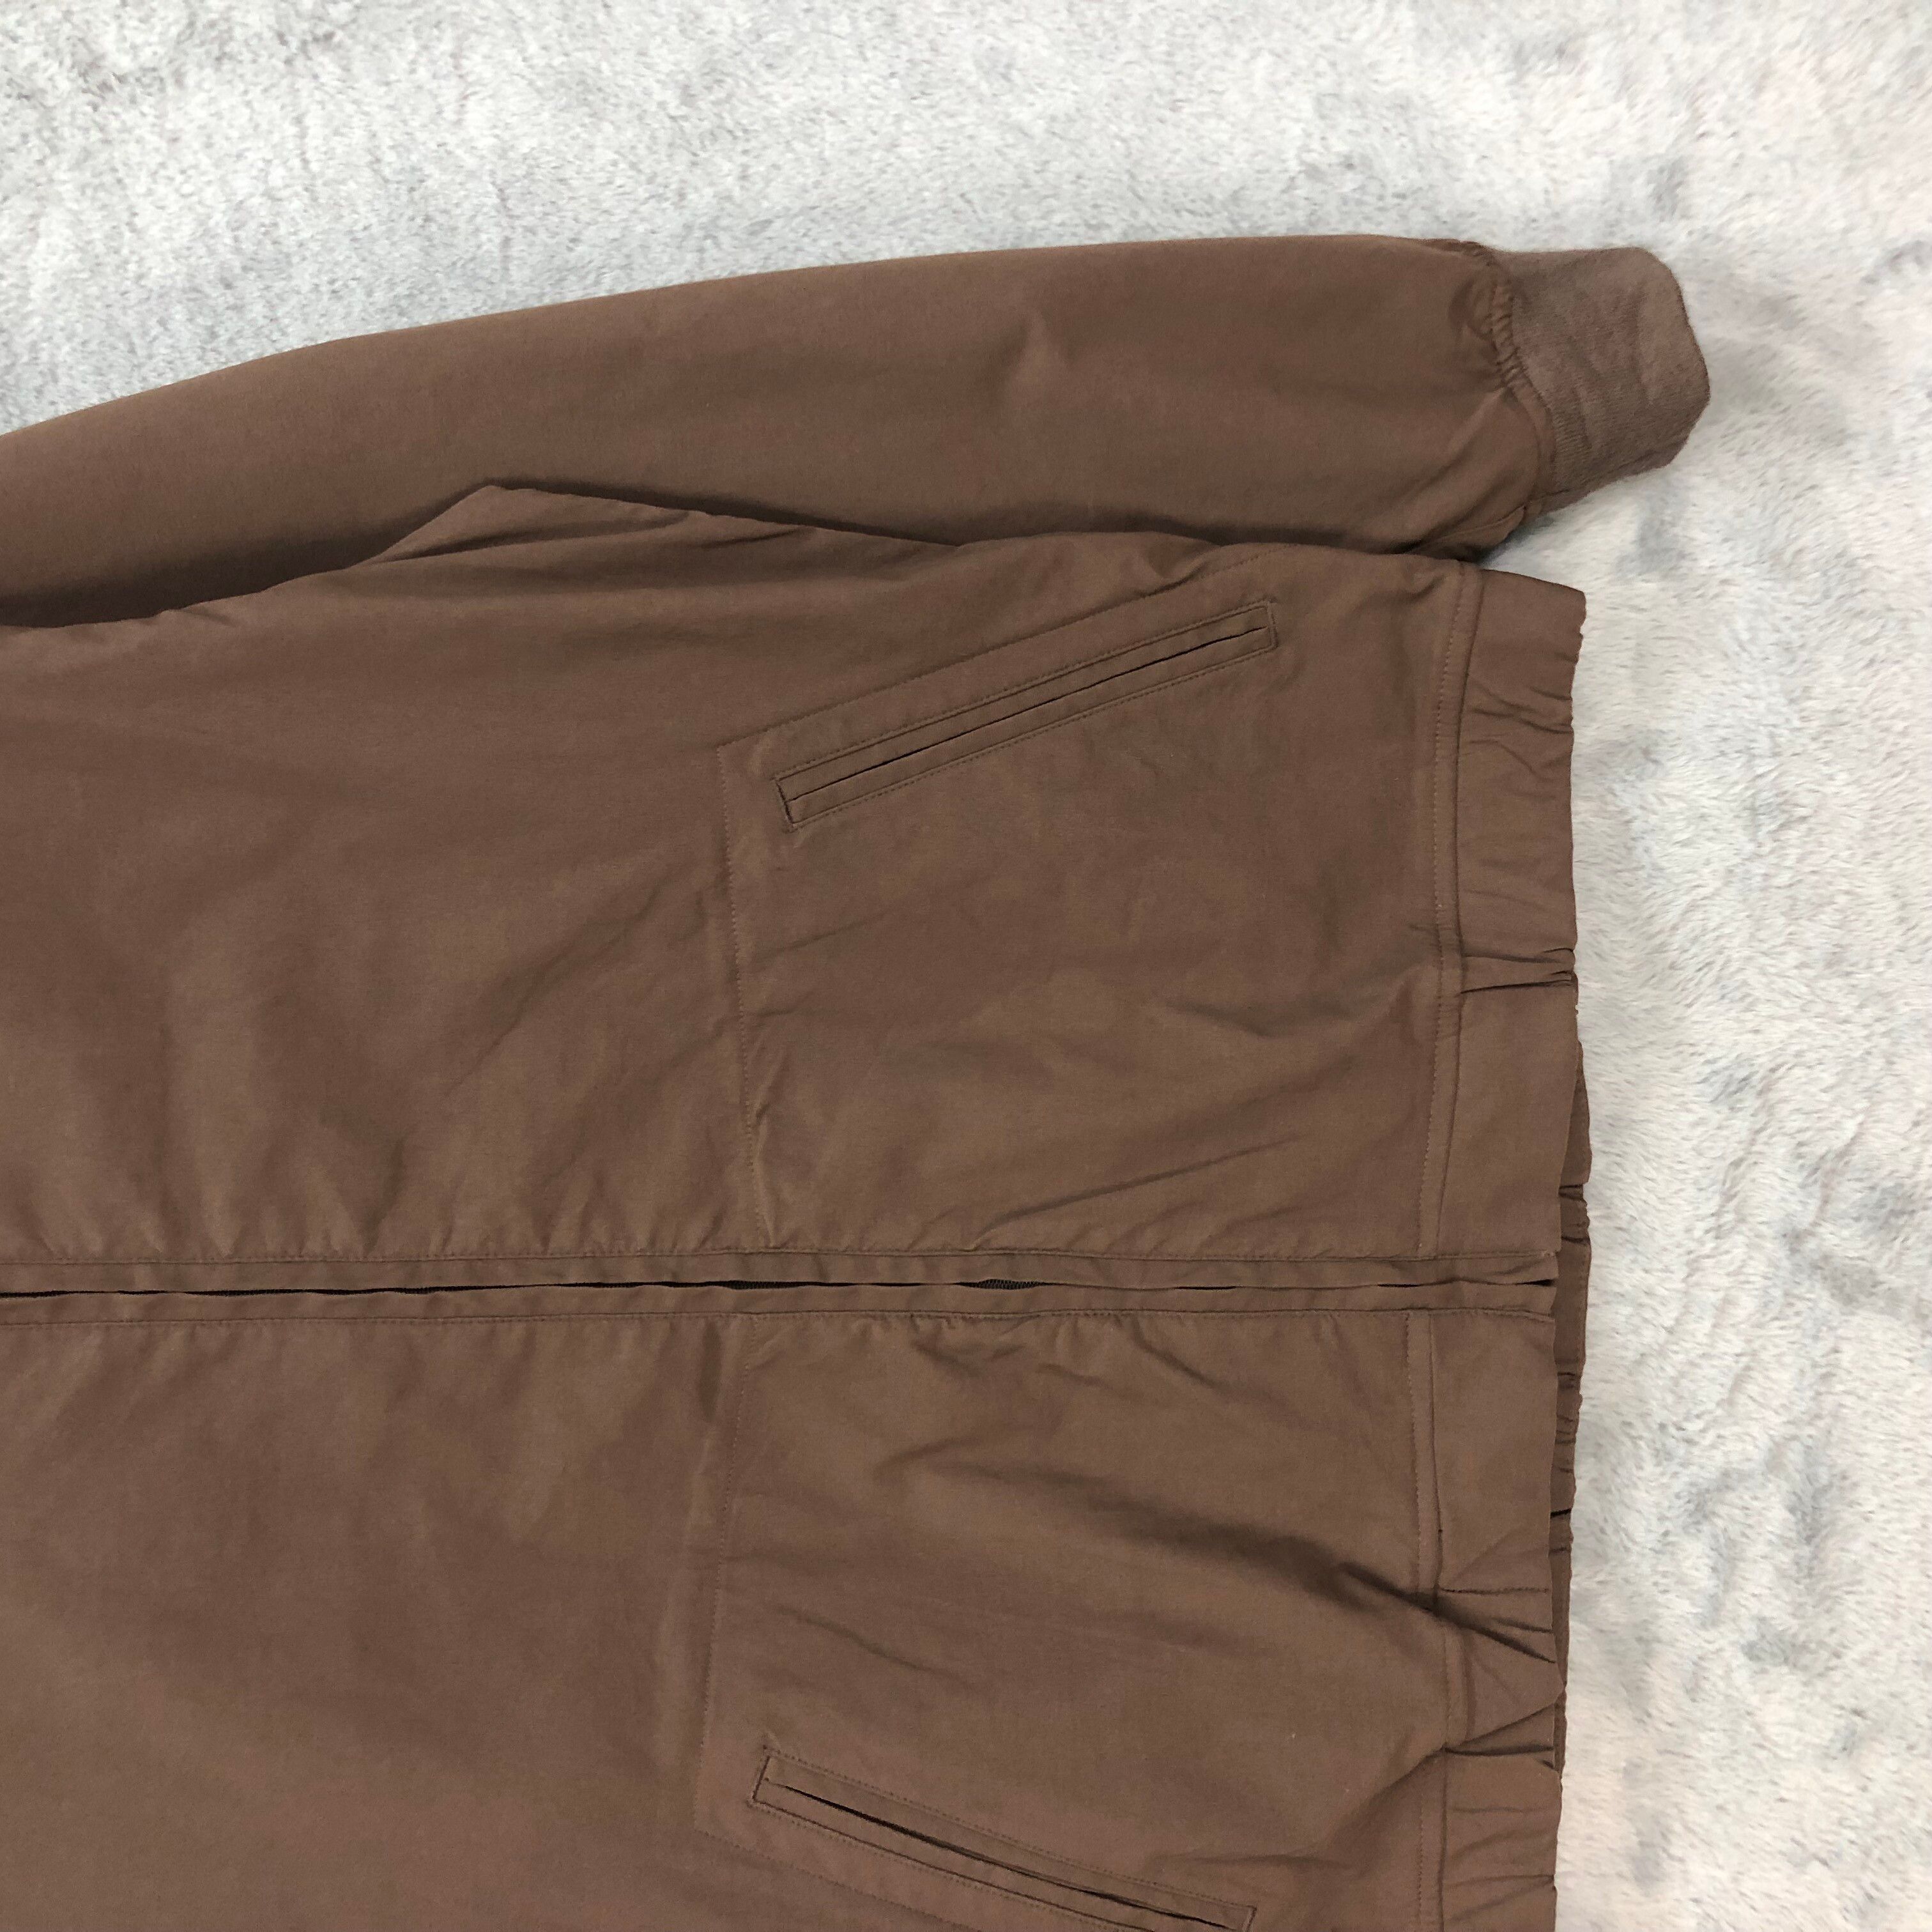 GREEN LABEL RELAXING United Arrows All Brown Bomber 5167-177 - 5